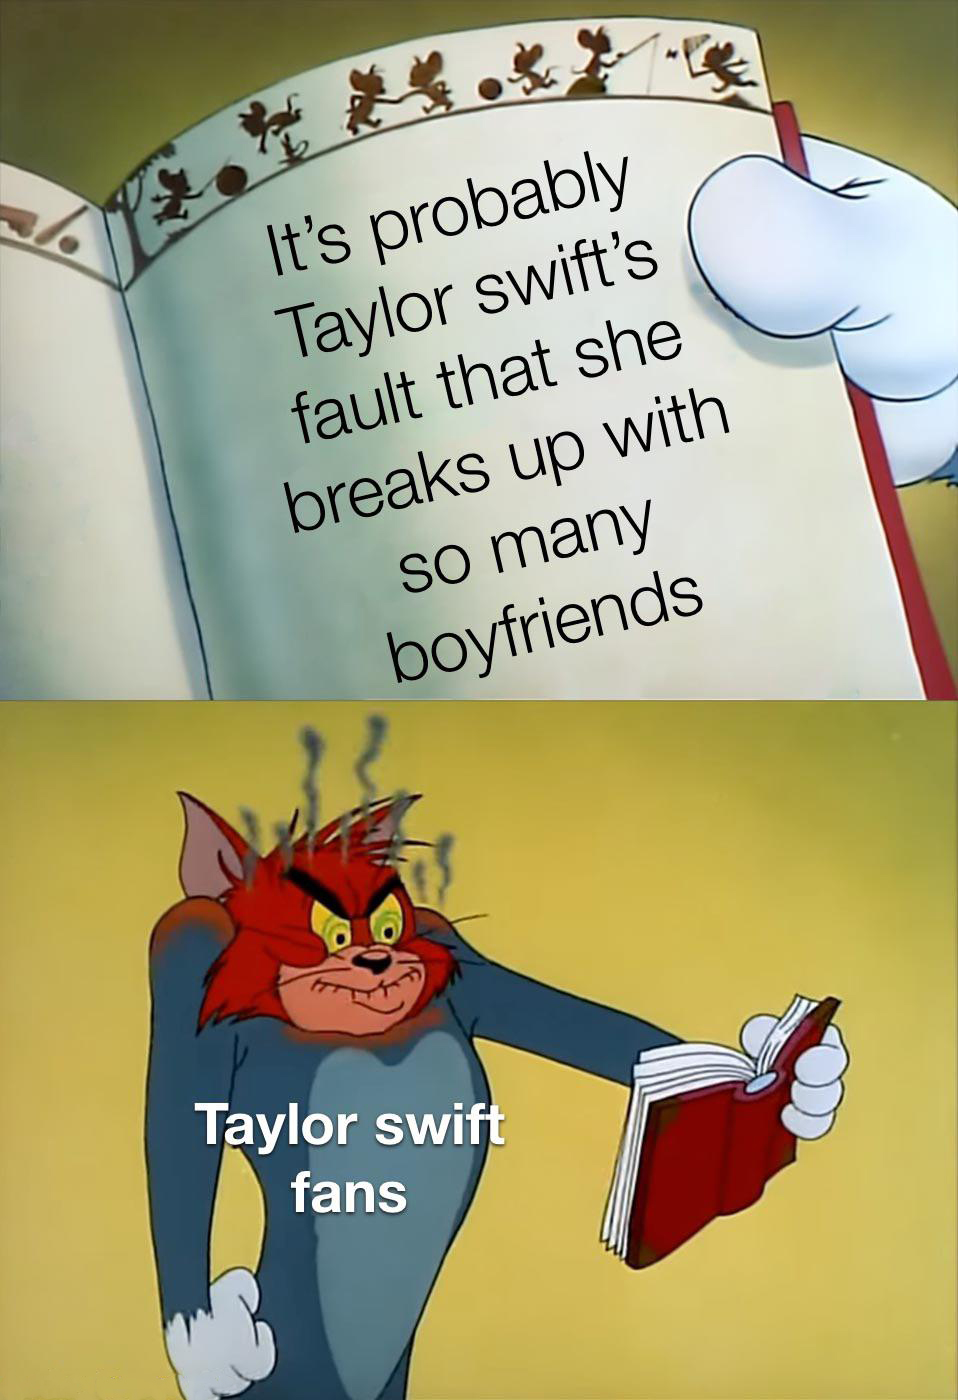 angry tom reading book meme - It's probably Taylor swift's fault that she breaks up with so many boyfriends Taylor swift fans